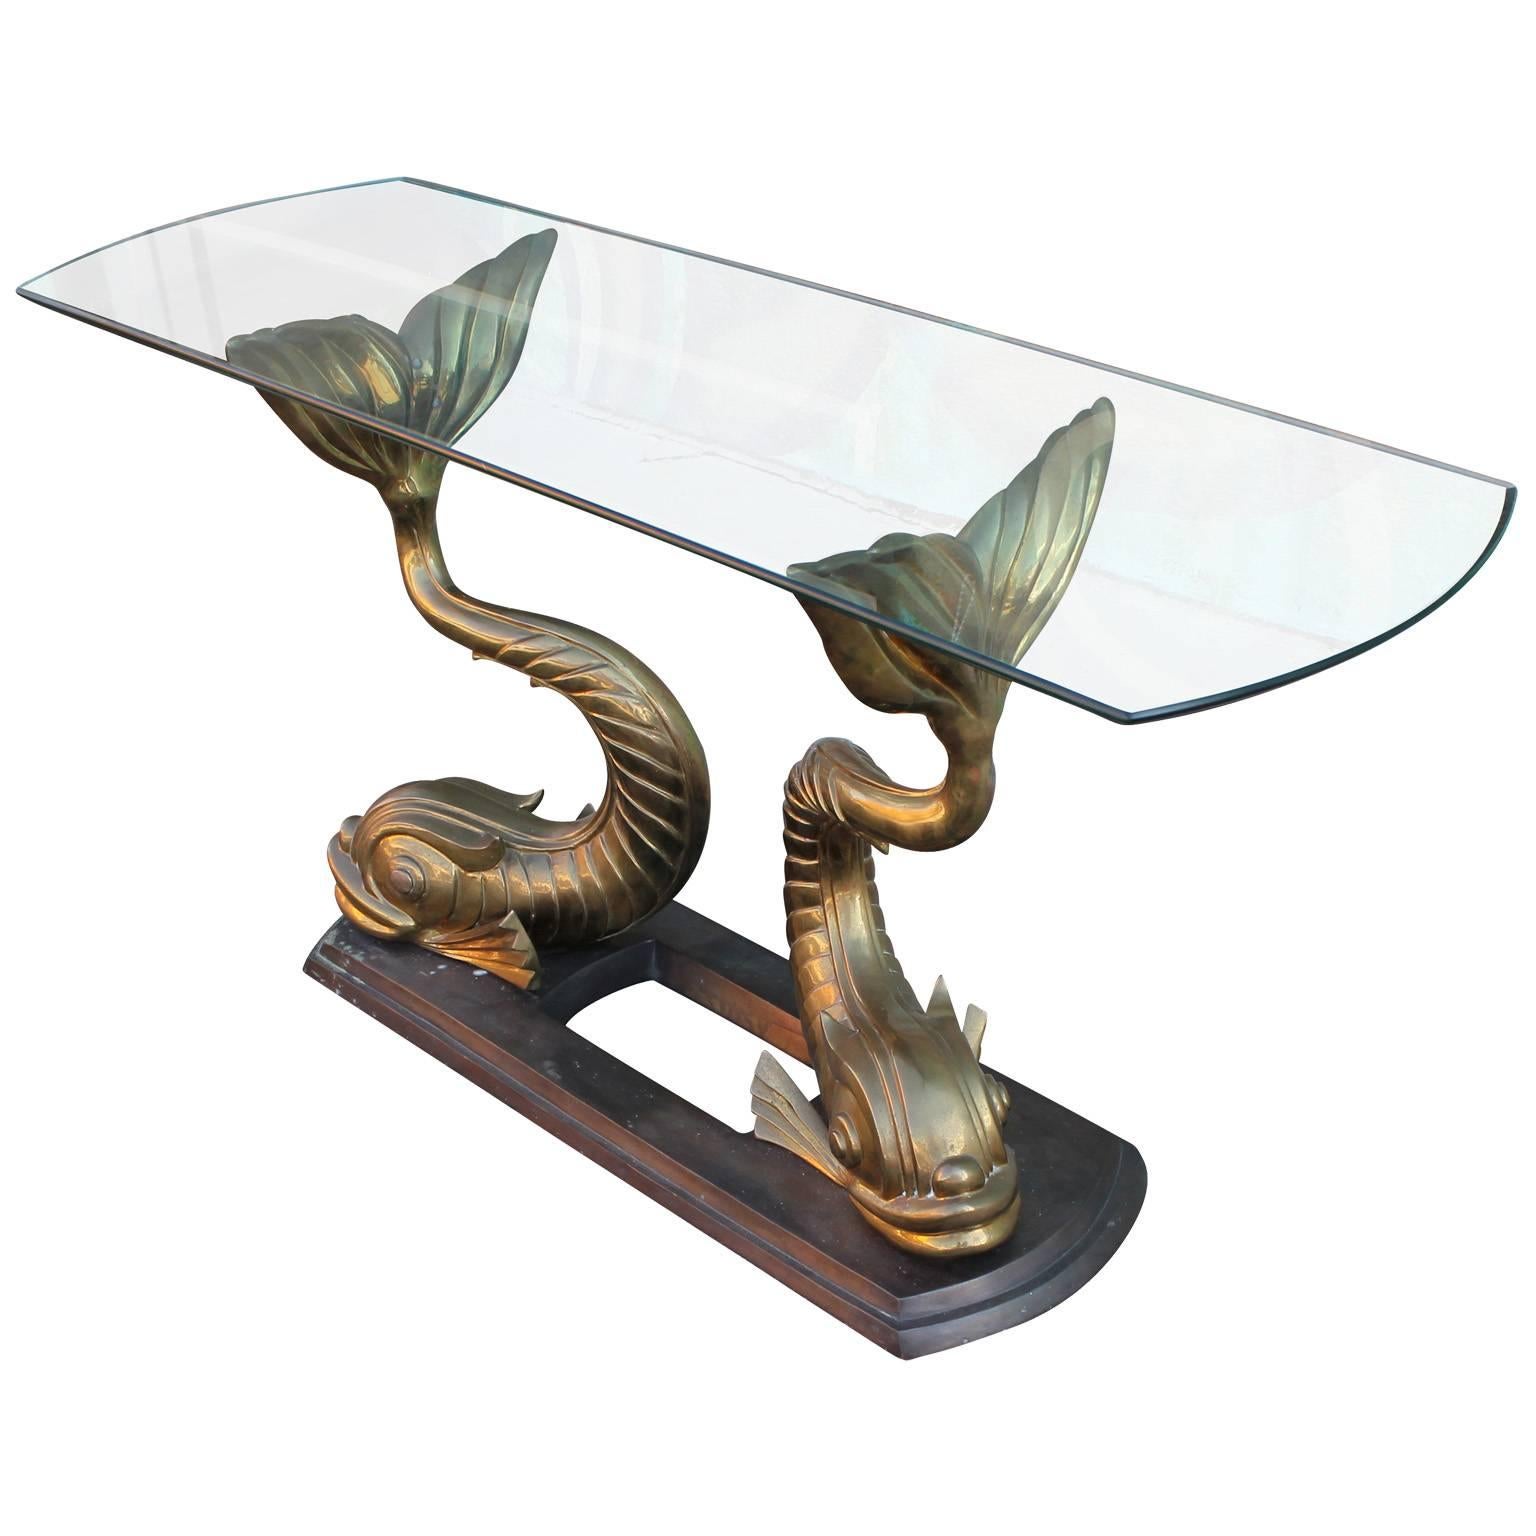 Incredible console table. Brass or bronze table base depicts two sculptural Koi fish. Topped with a thick glass, rounded top.  Stunning in any room. Table has an excellent patina. 